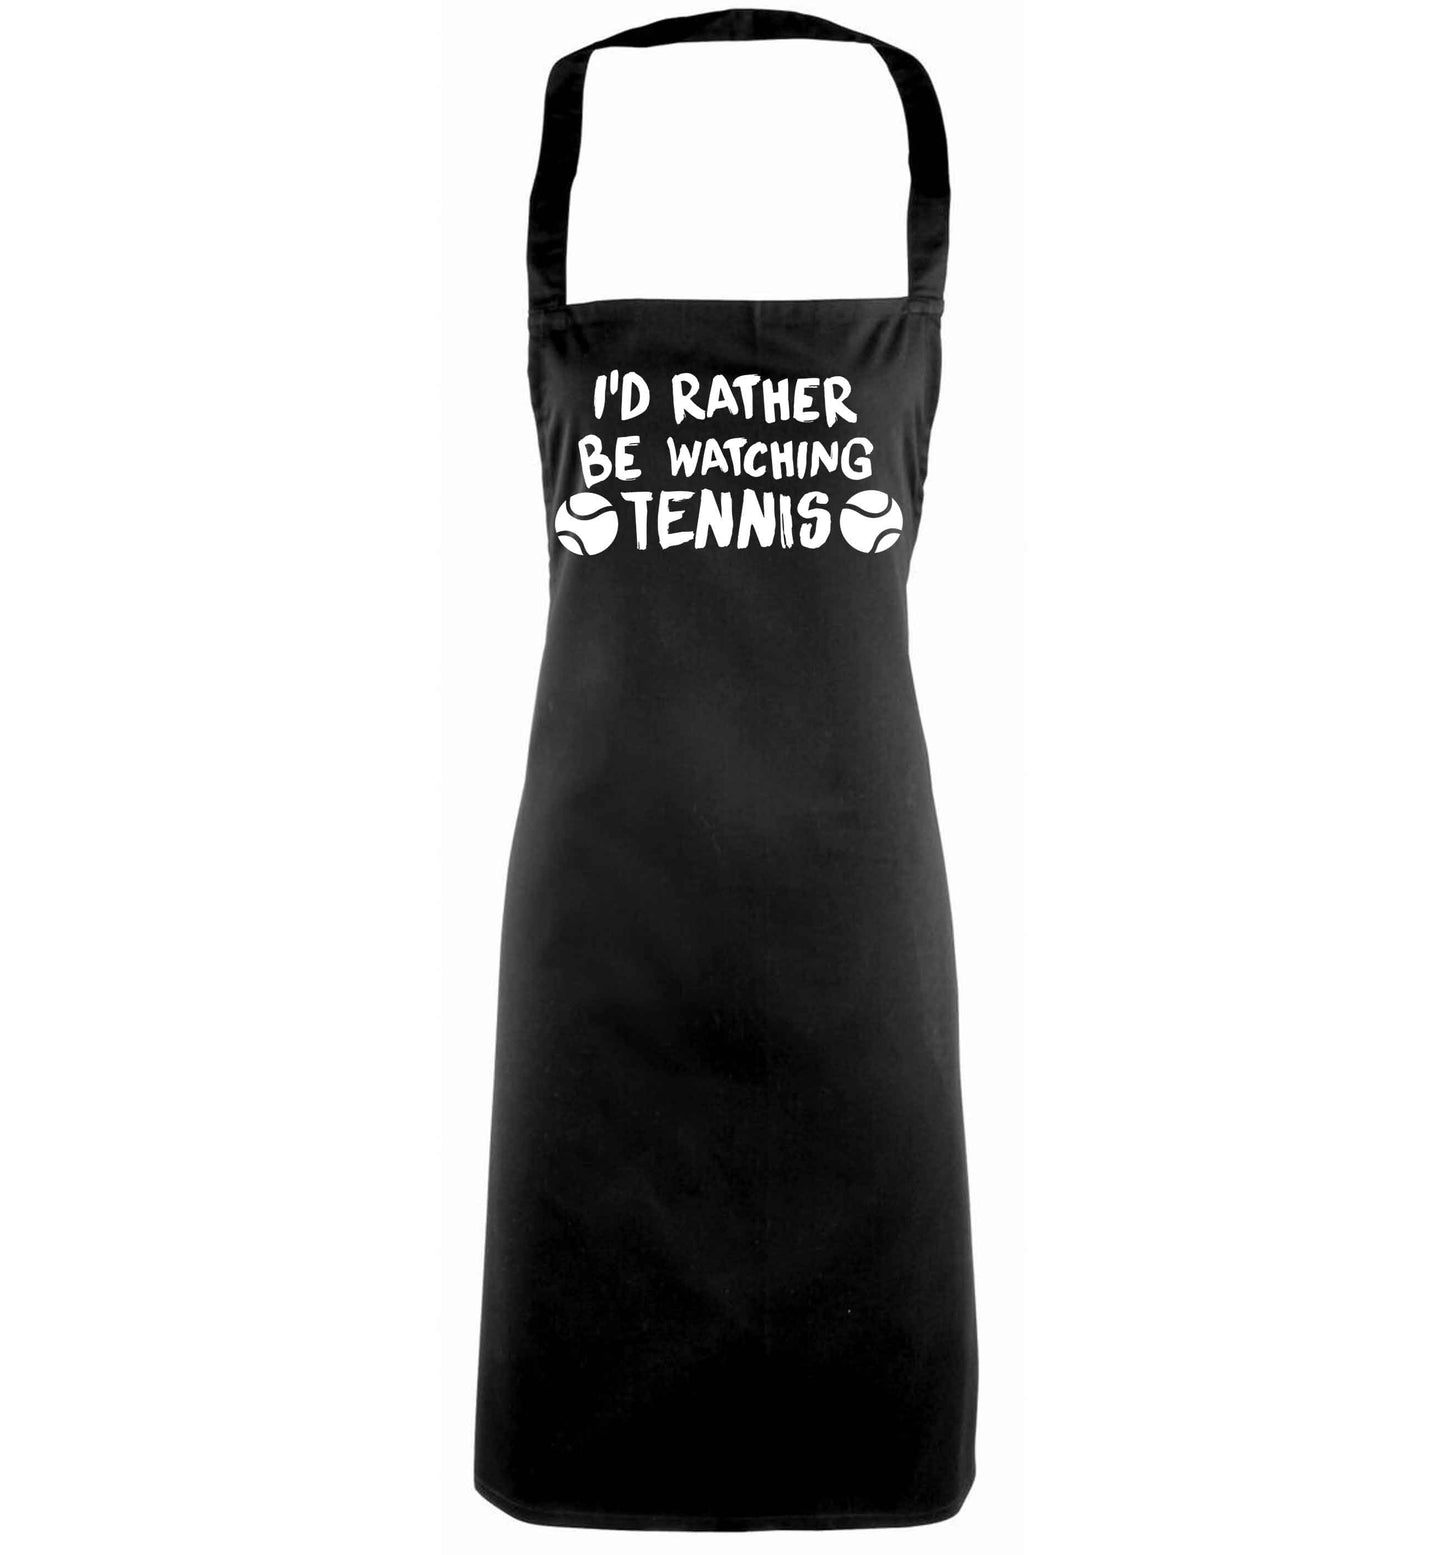 I'd rather be watching the tennis black apron